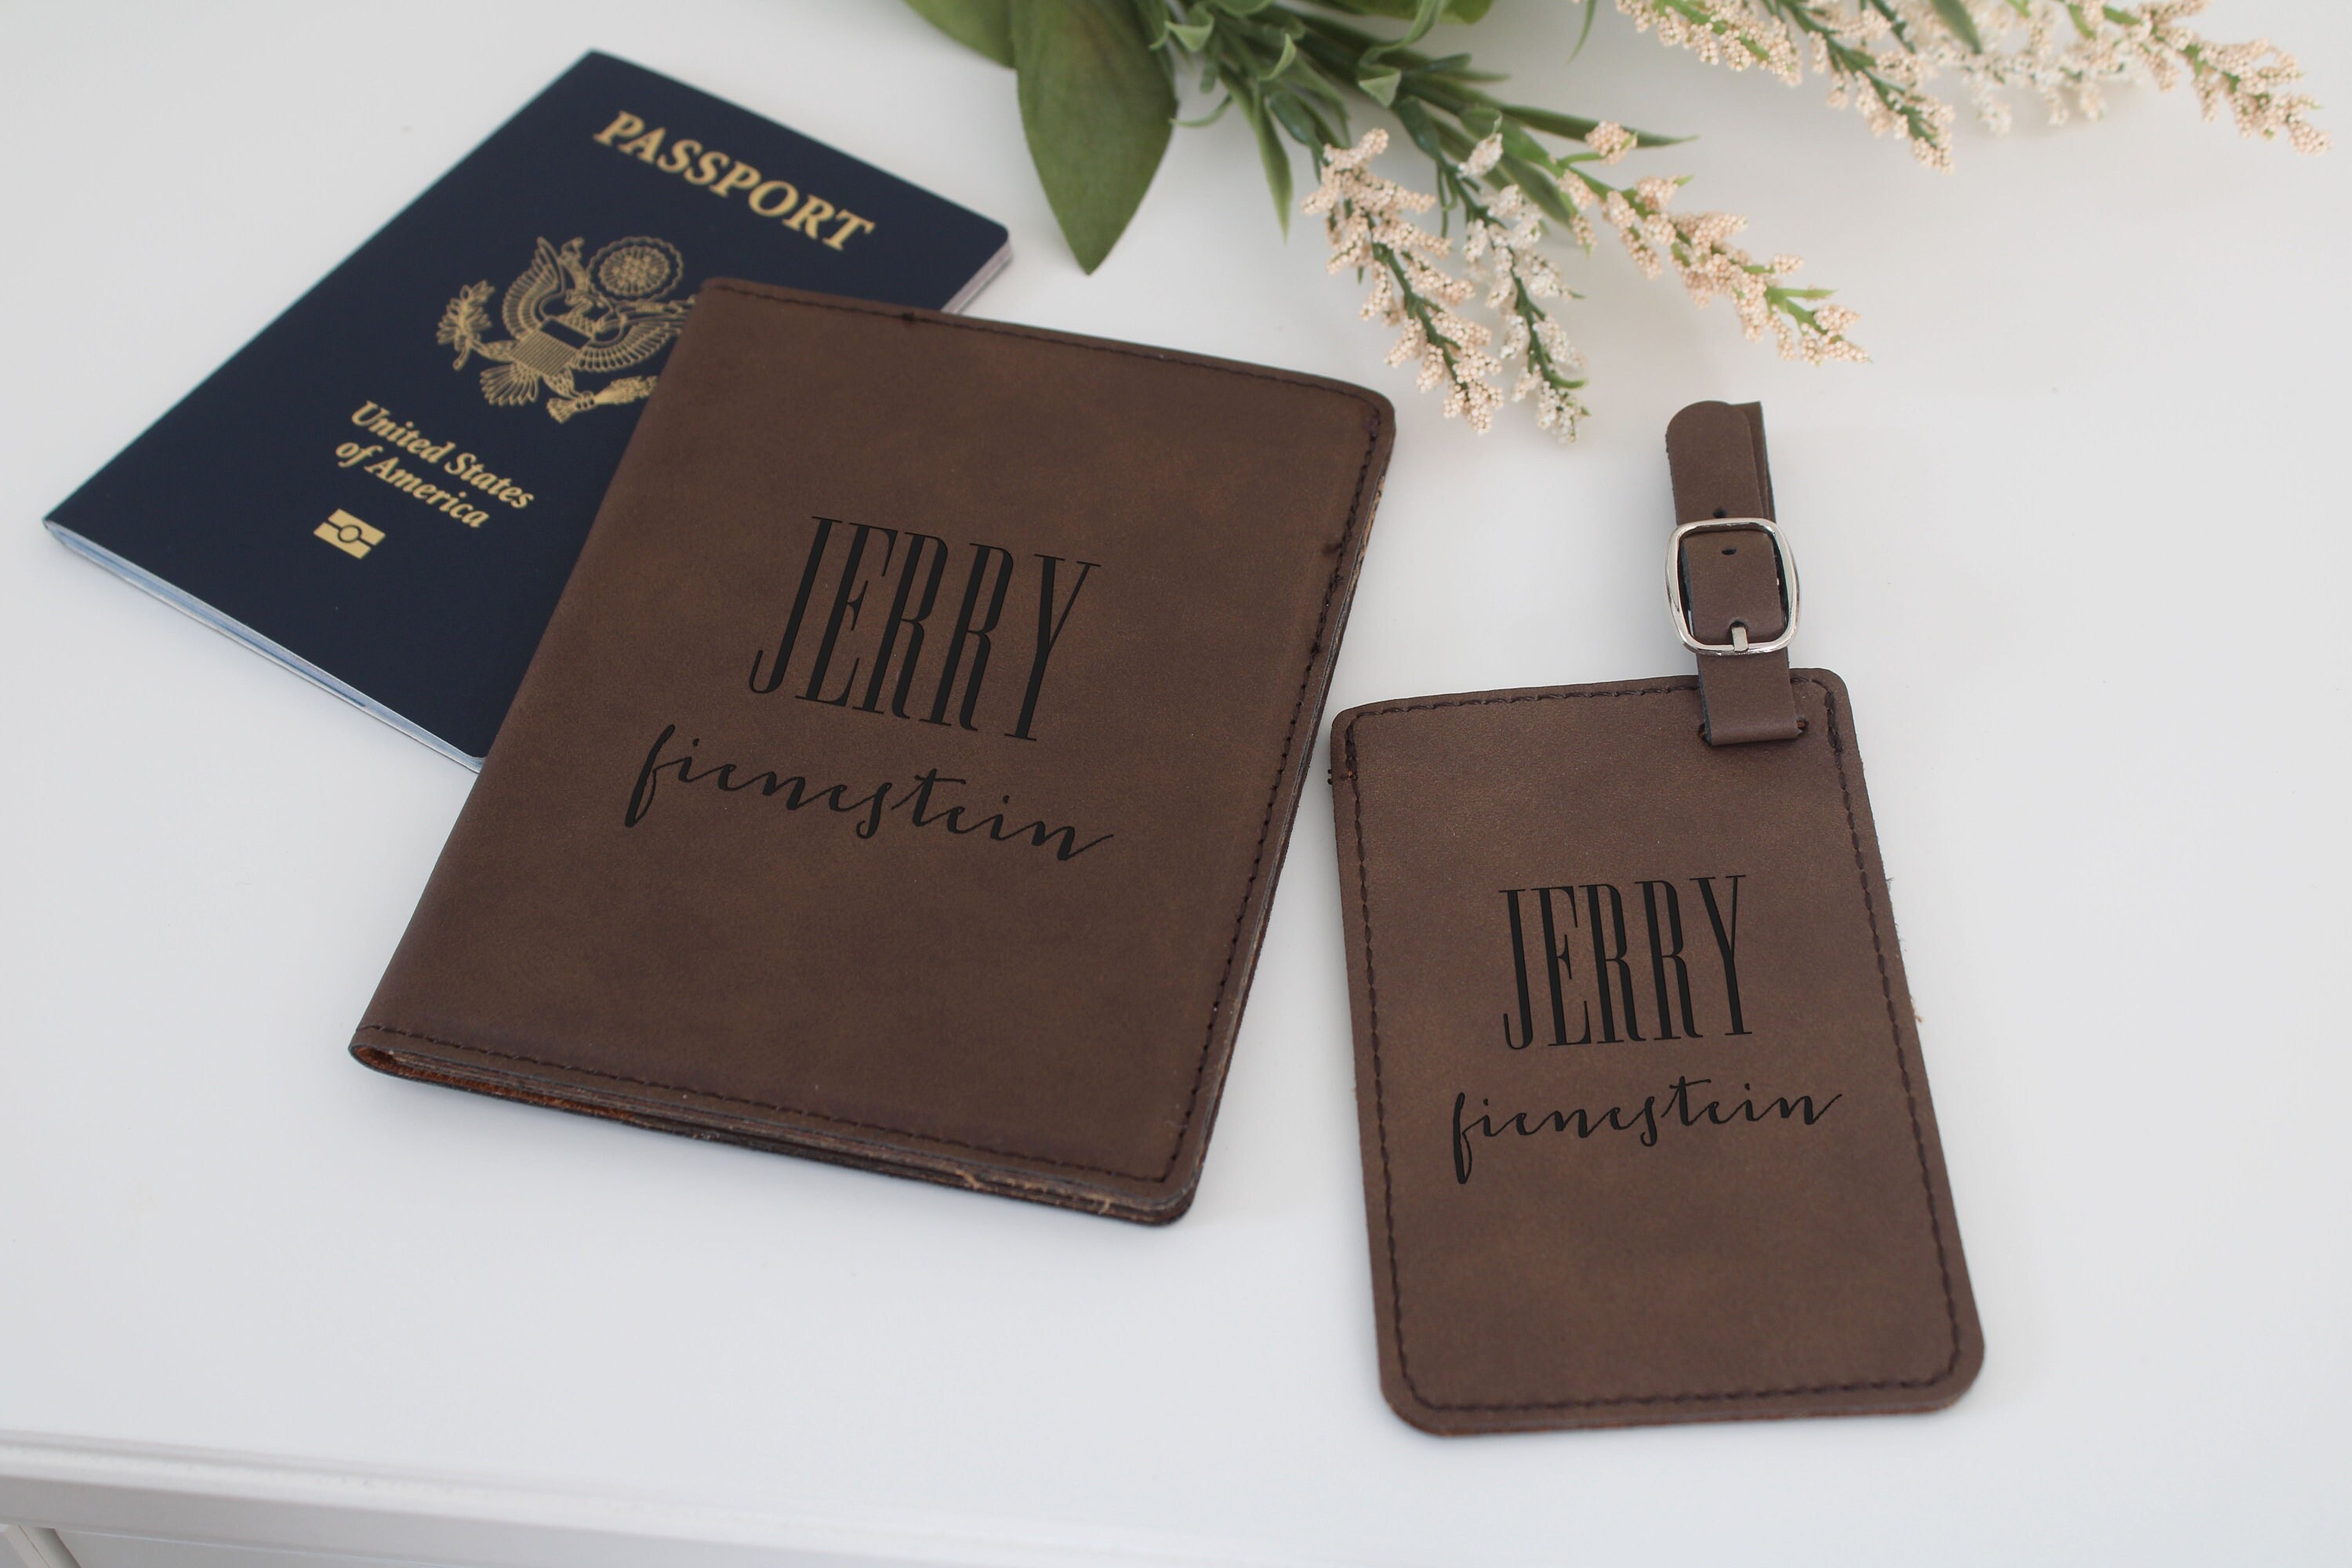 Personalized Name Passport Cover Light Brown